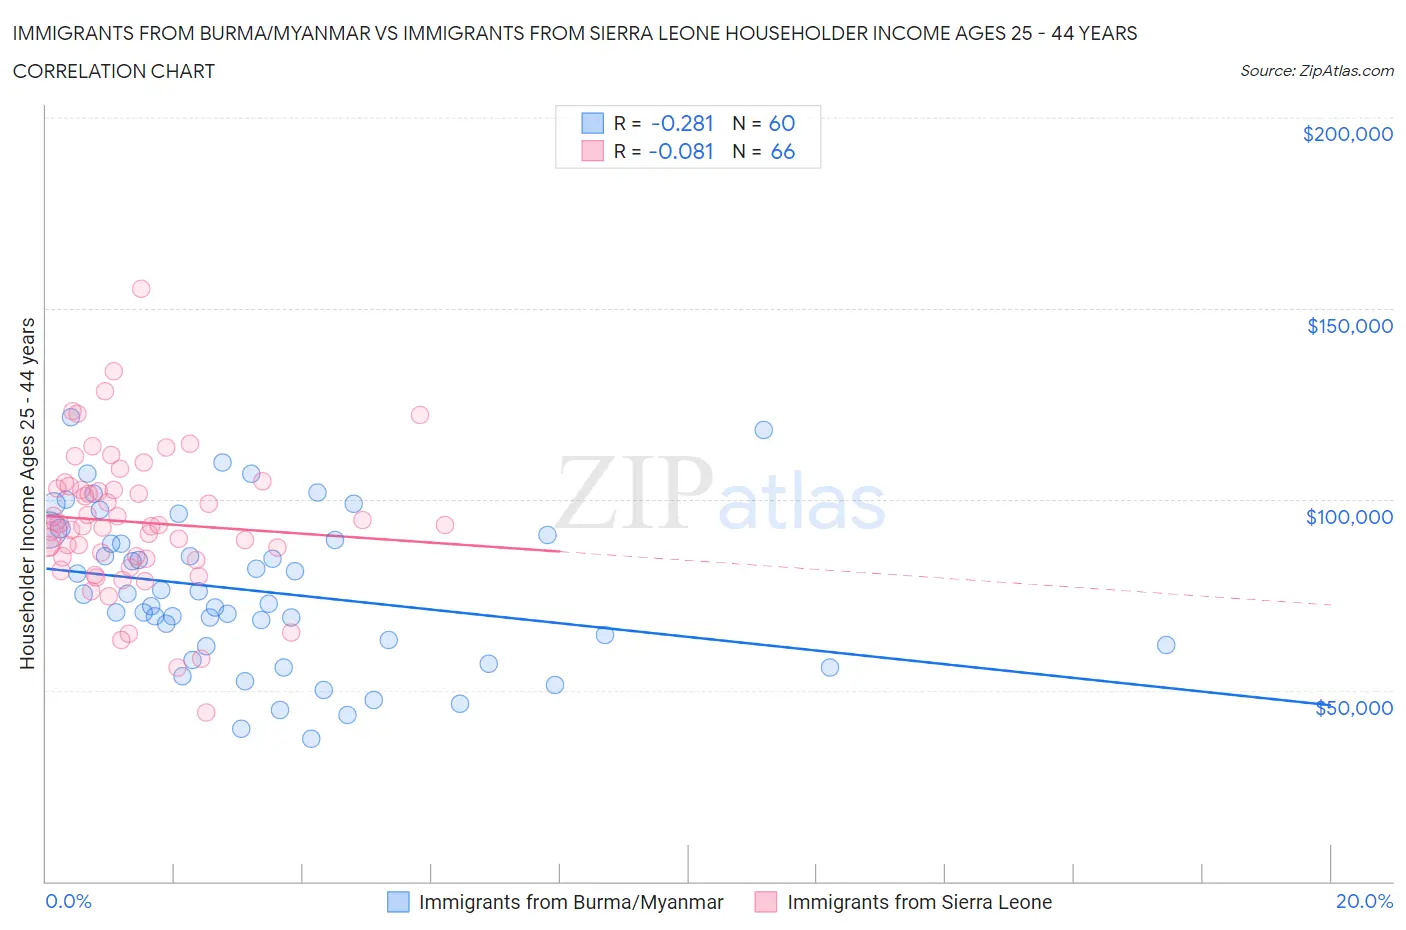 Immigrants from Burma/Myanmar vs Immigrants from Sierra Leone Householder Income Ages 25 - 44 years